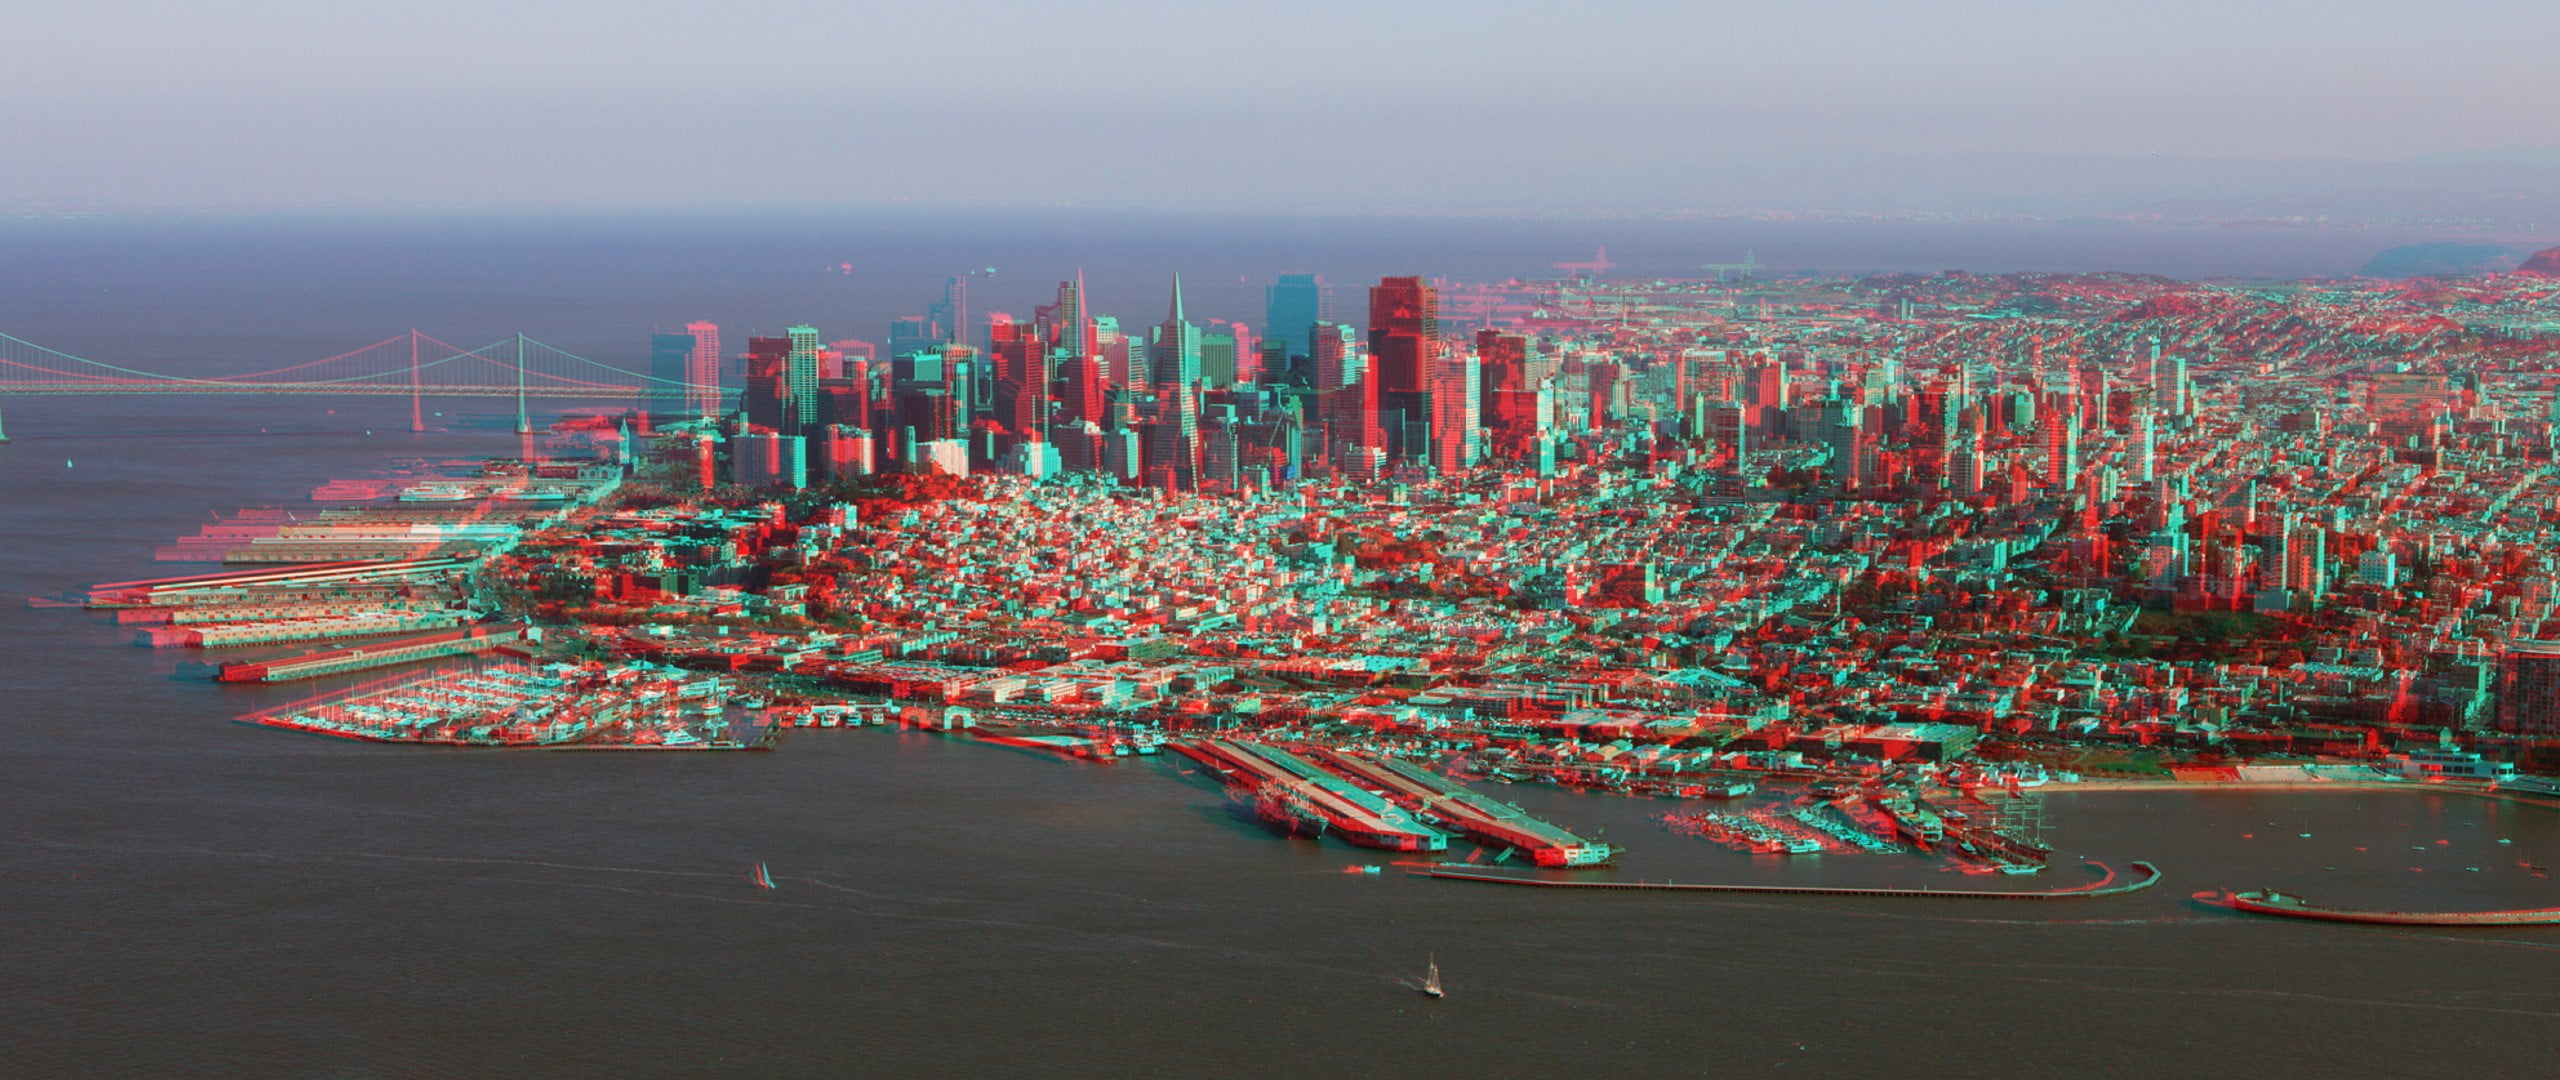 aerial photography of city buildings, anaglyph 3D, San Francisco